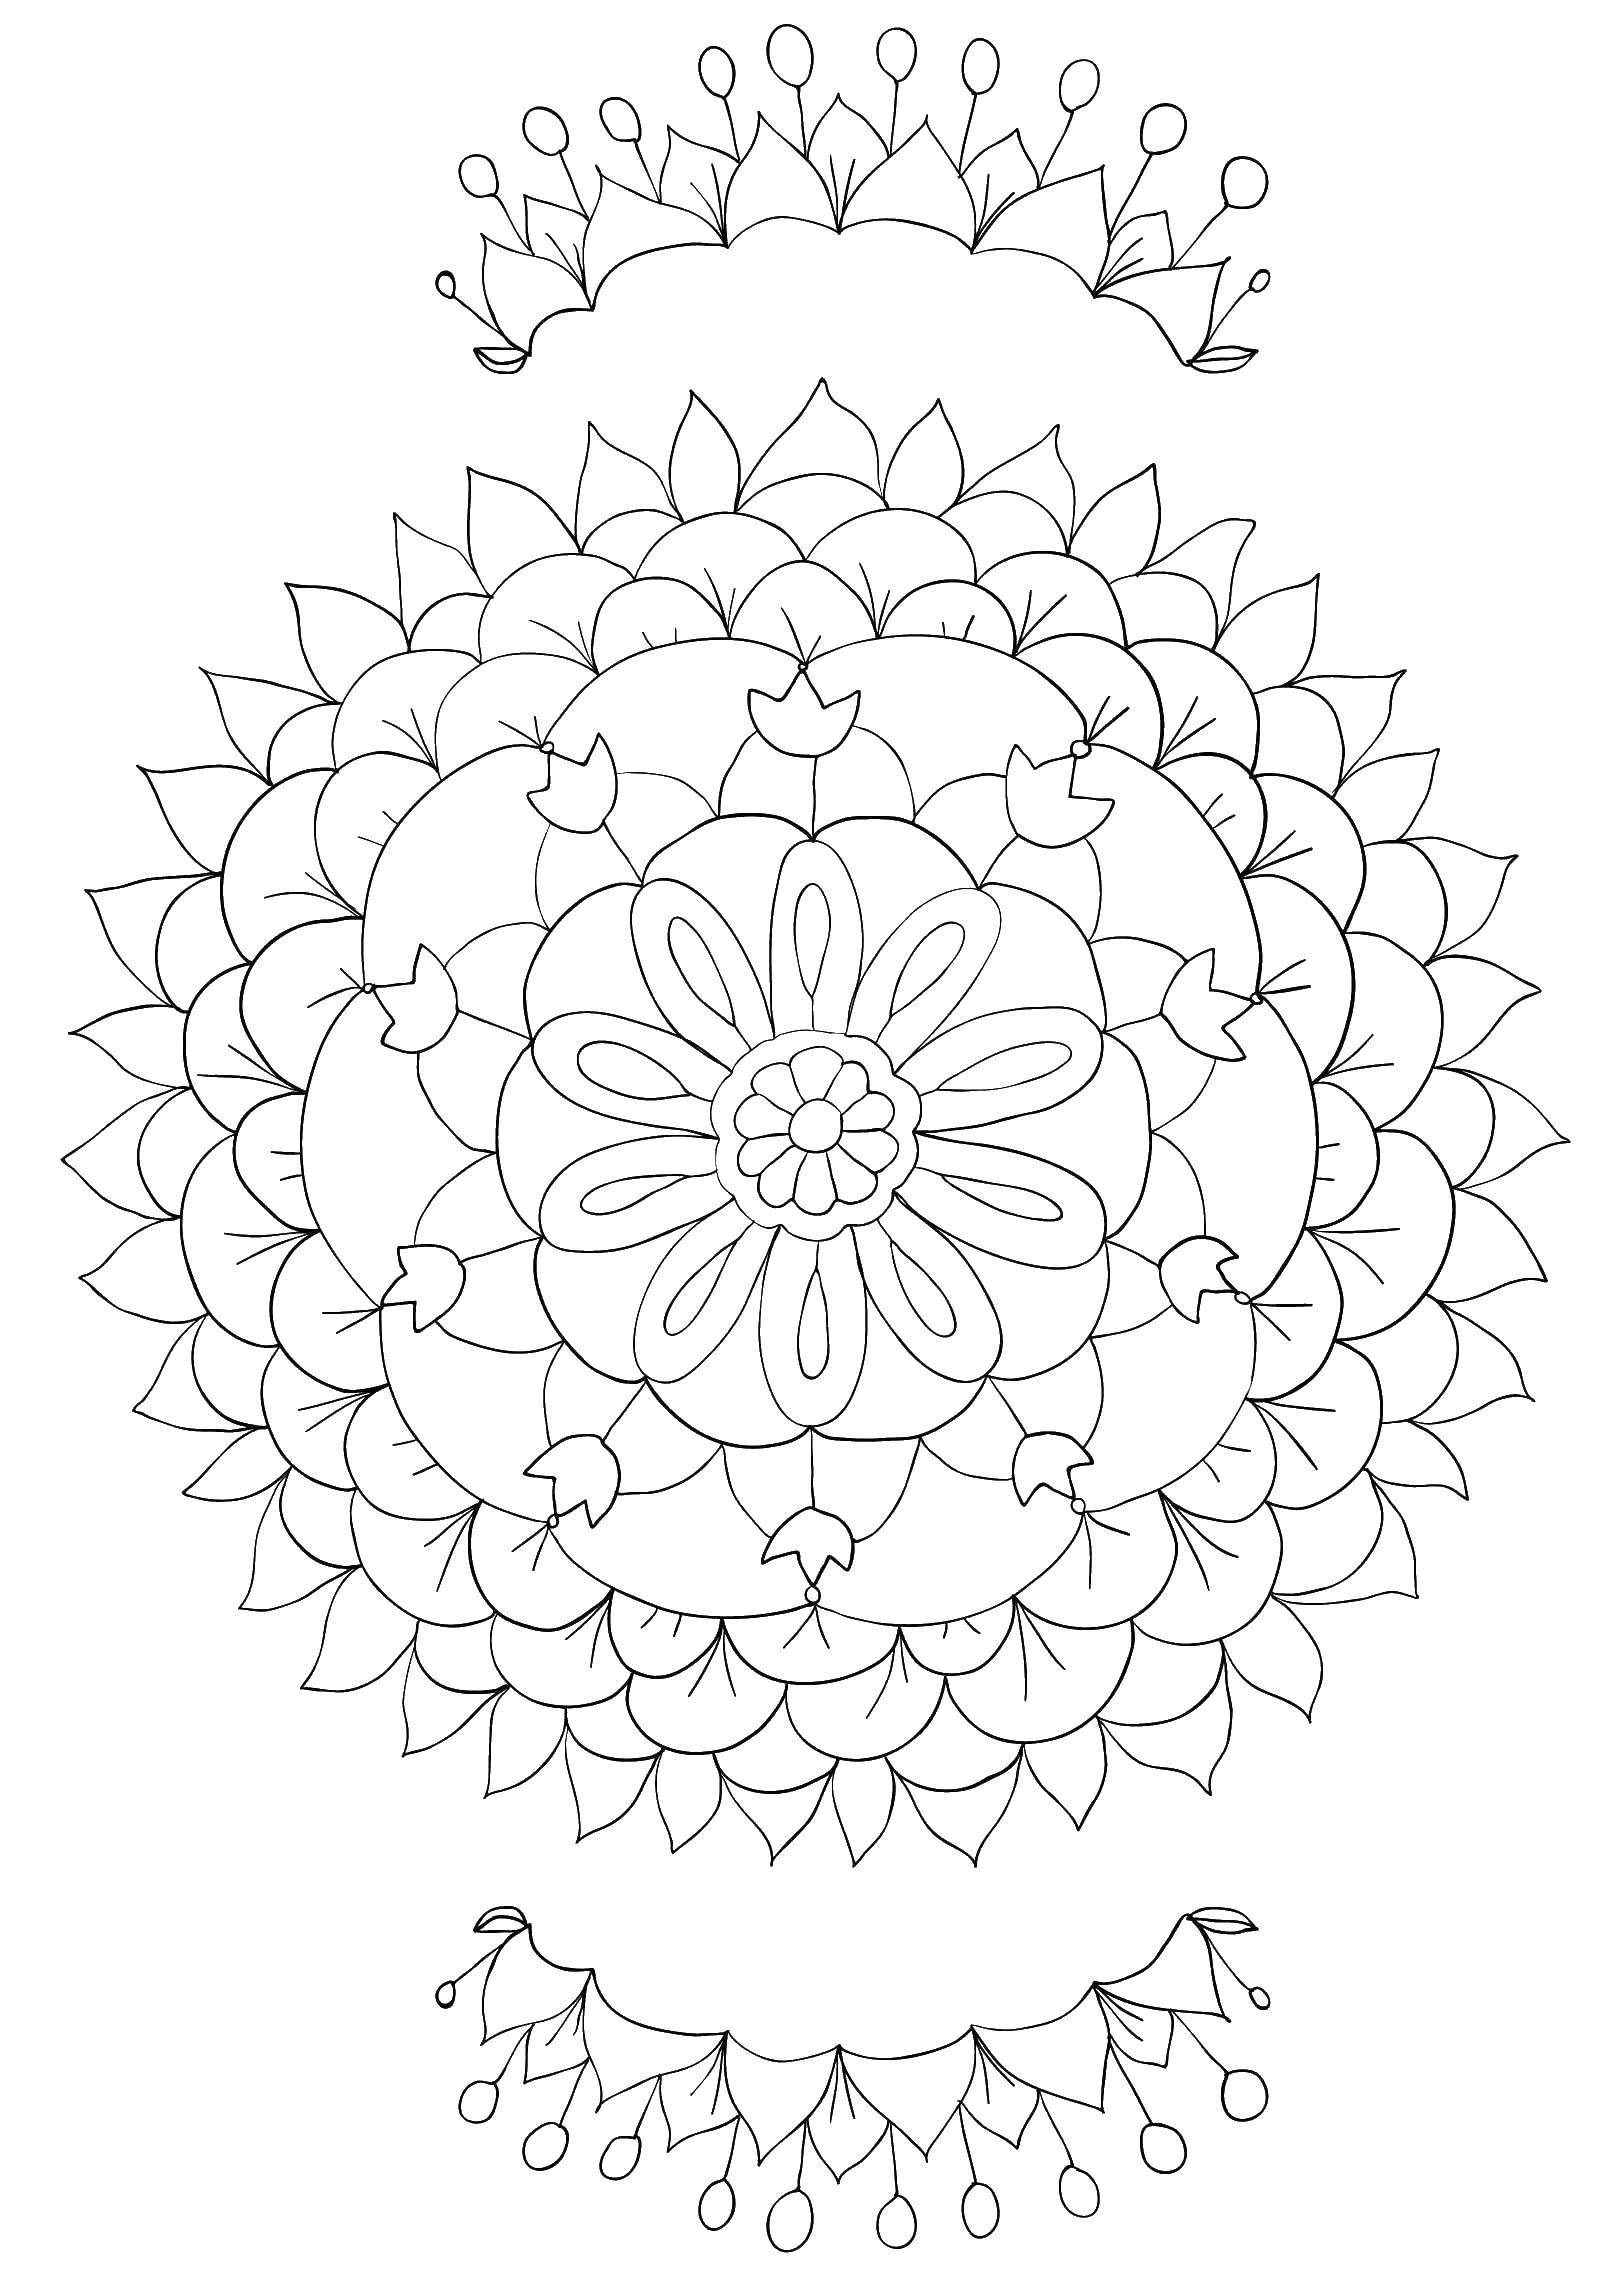 Coloring Flowers and patterns. Category coloring for adults. Tags:  for adults, antistress, patterns.